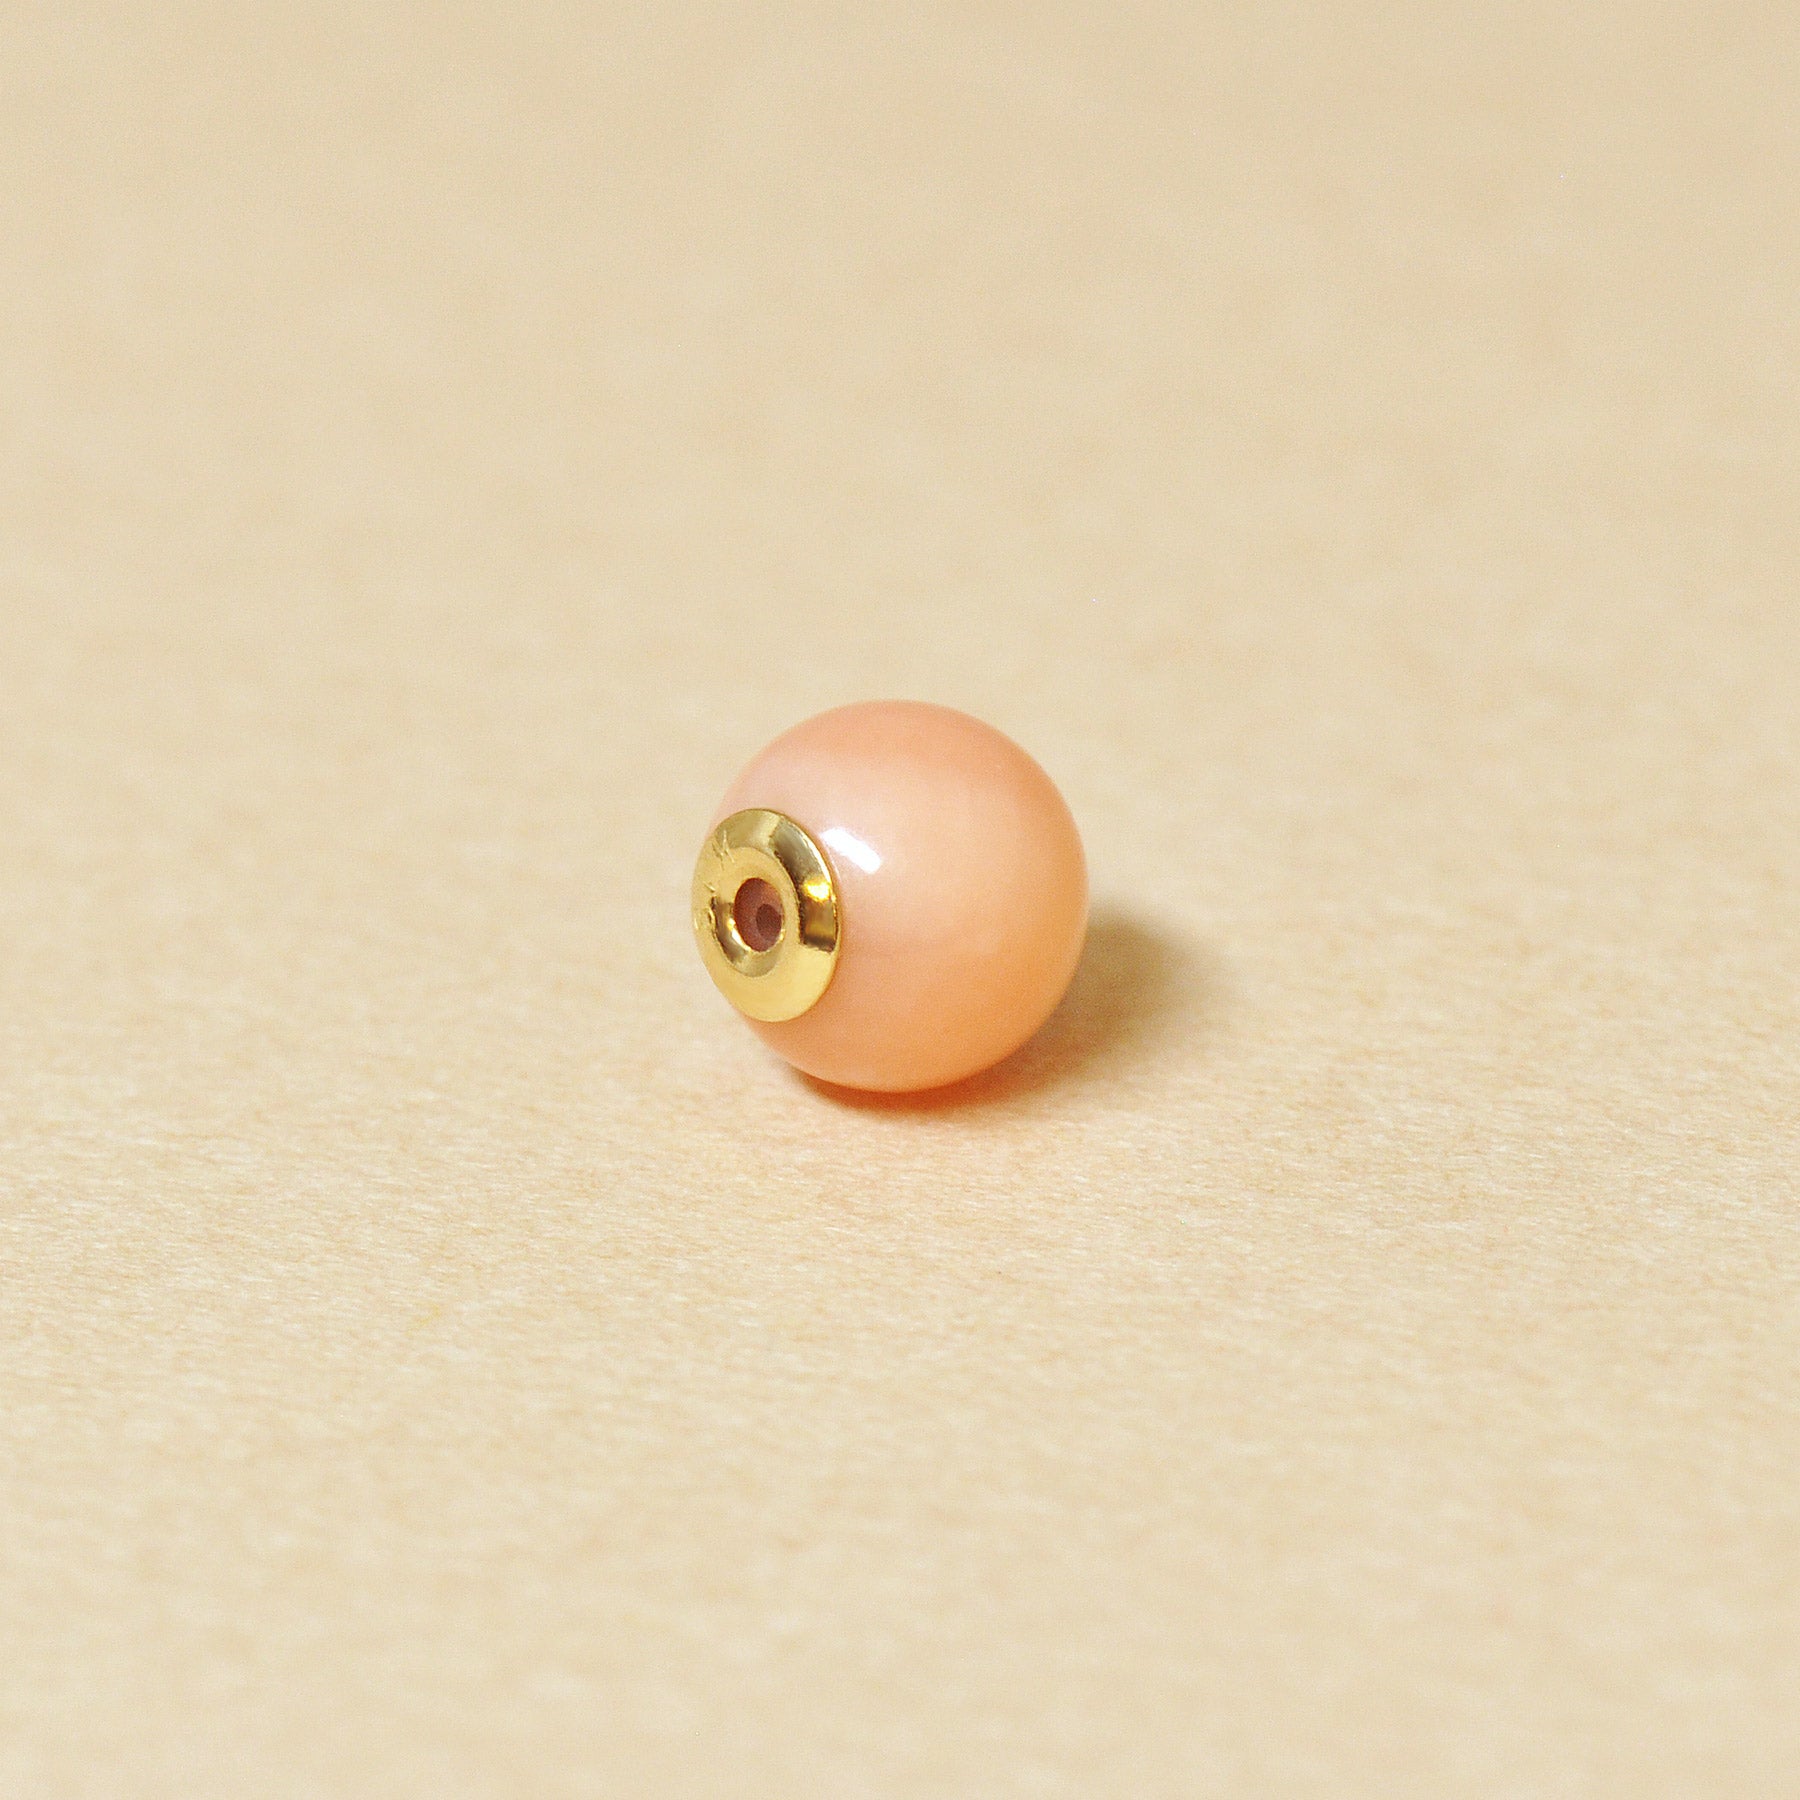 18K Gold Ball Friction Back (Coral) - Product Image